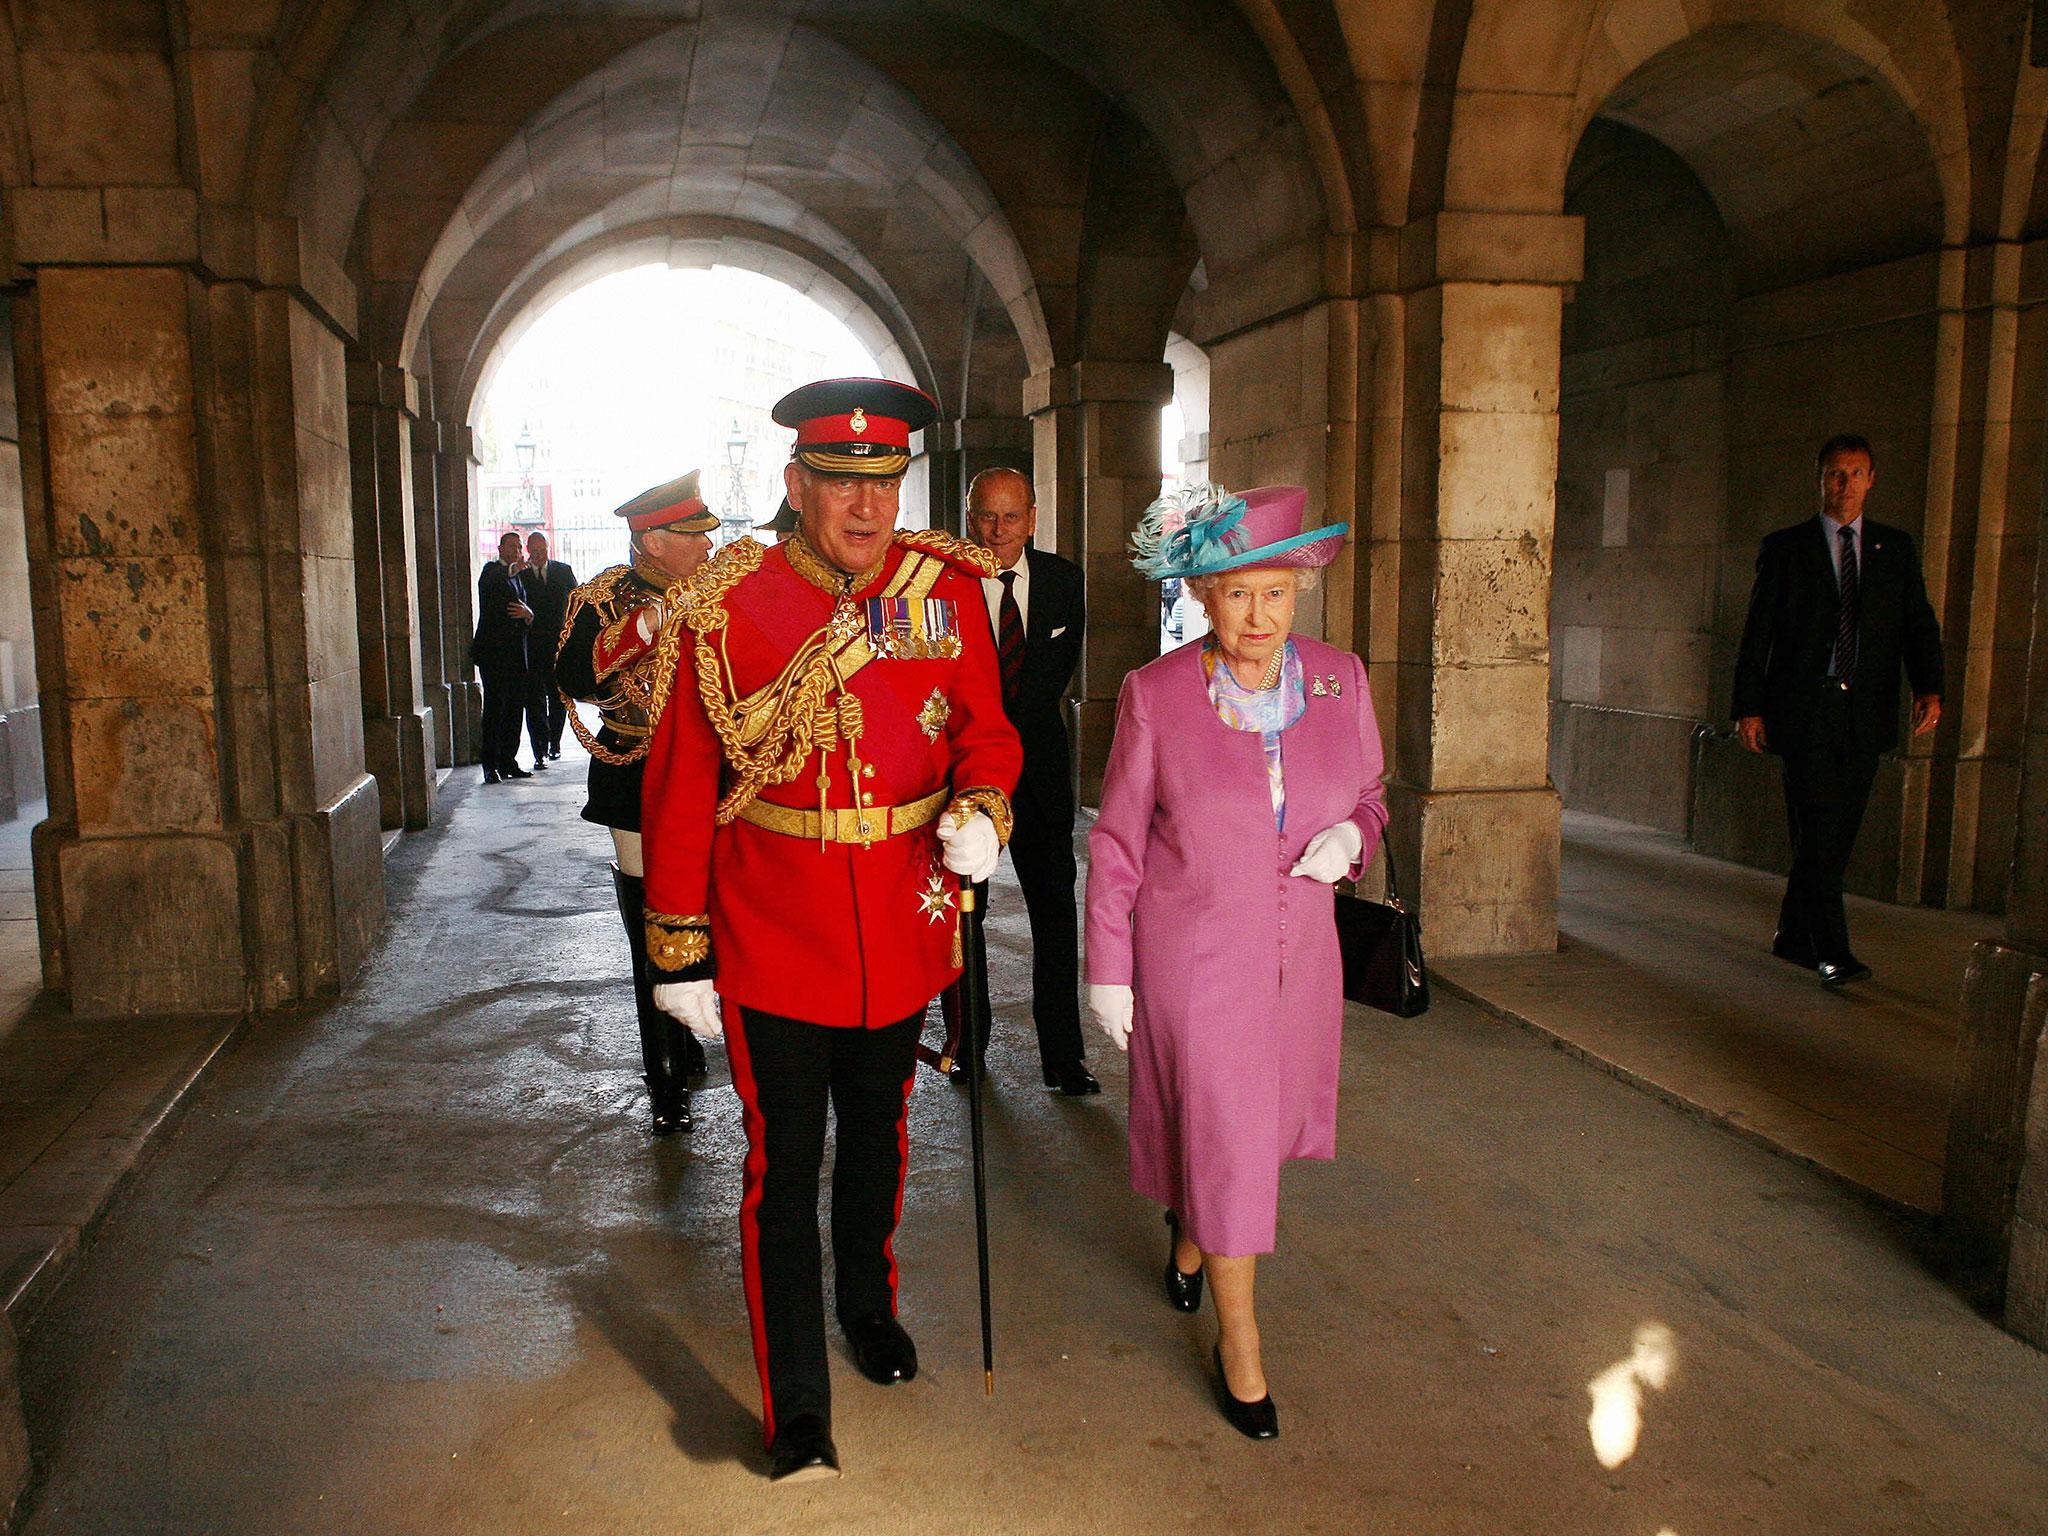 Lord Guthrie (left) former Chief of Defence Staff walks with Queen Elizabeth II at Horse Guards Parade, London